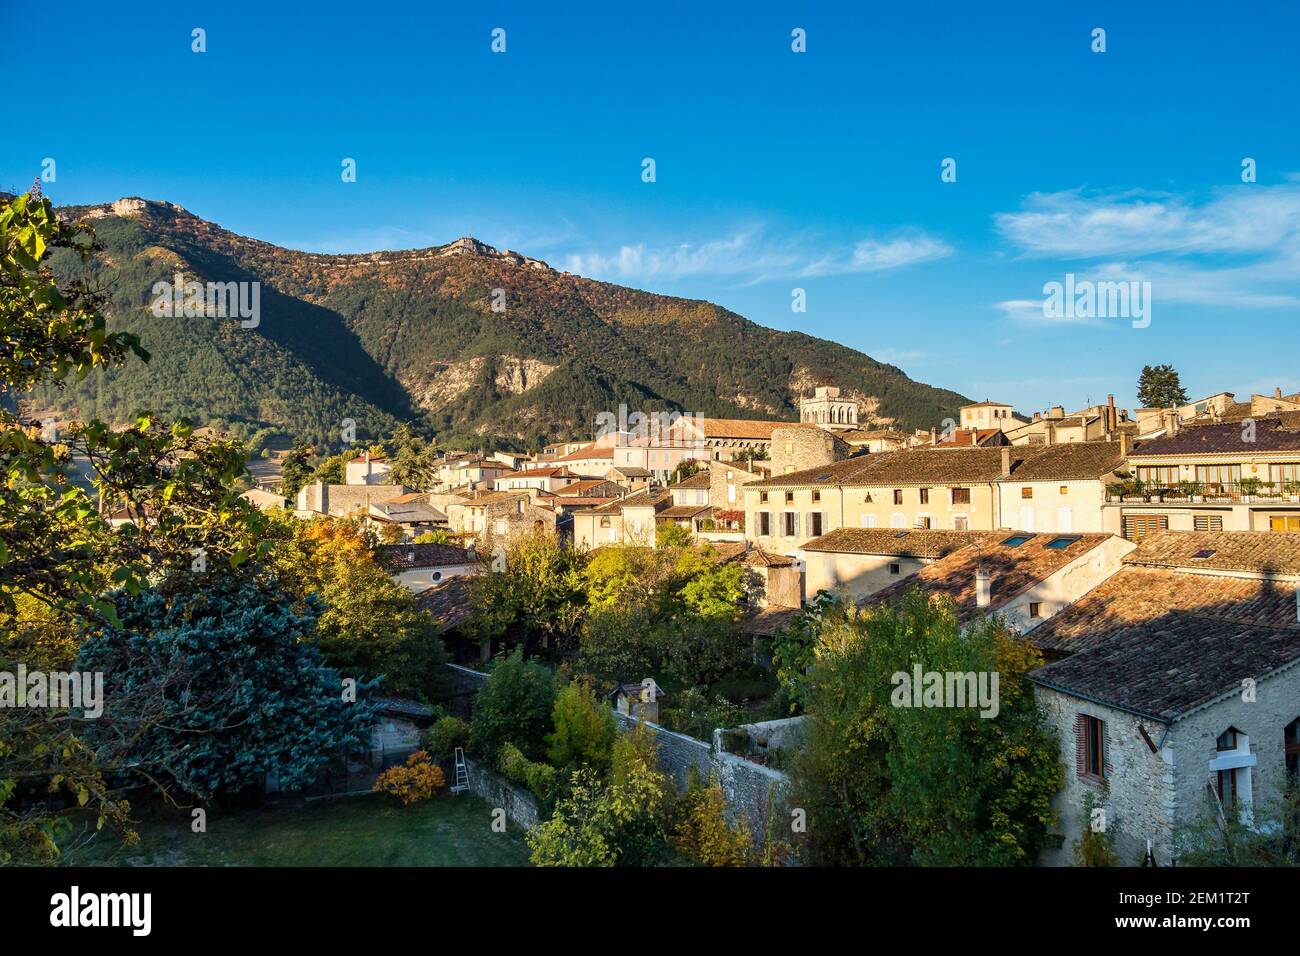 Cityscape of Die, Chatillon en Diois in Vercors Natural Regional Park, Diois, Drome, France in Europe Stock Photo